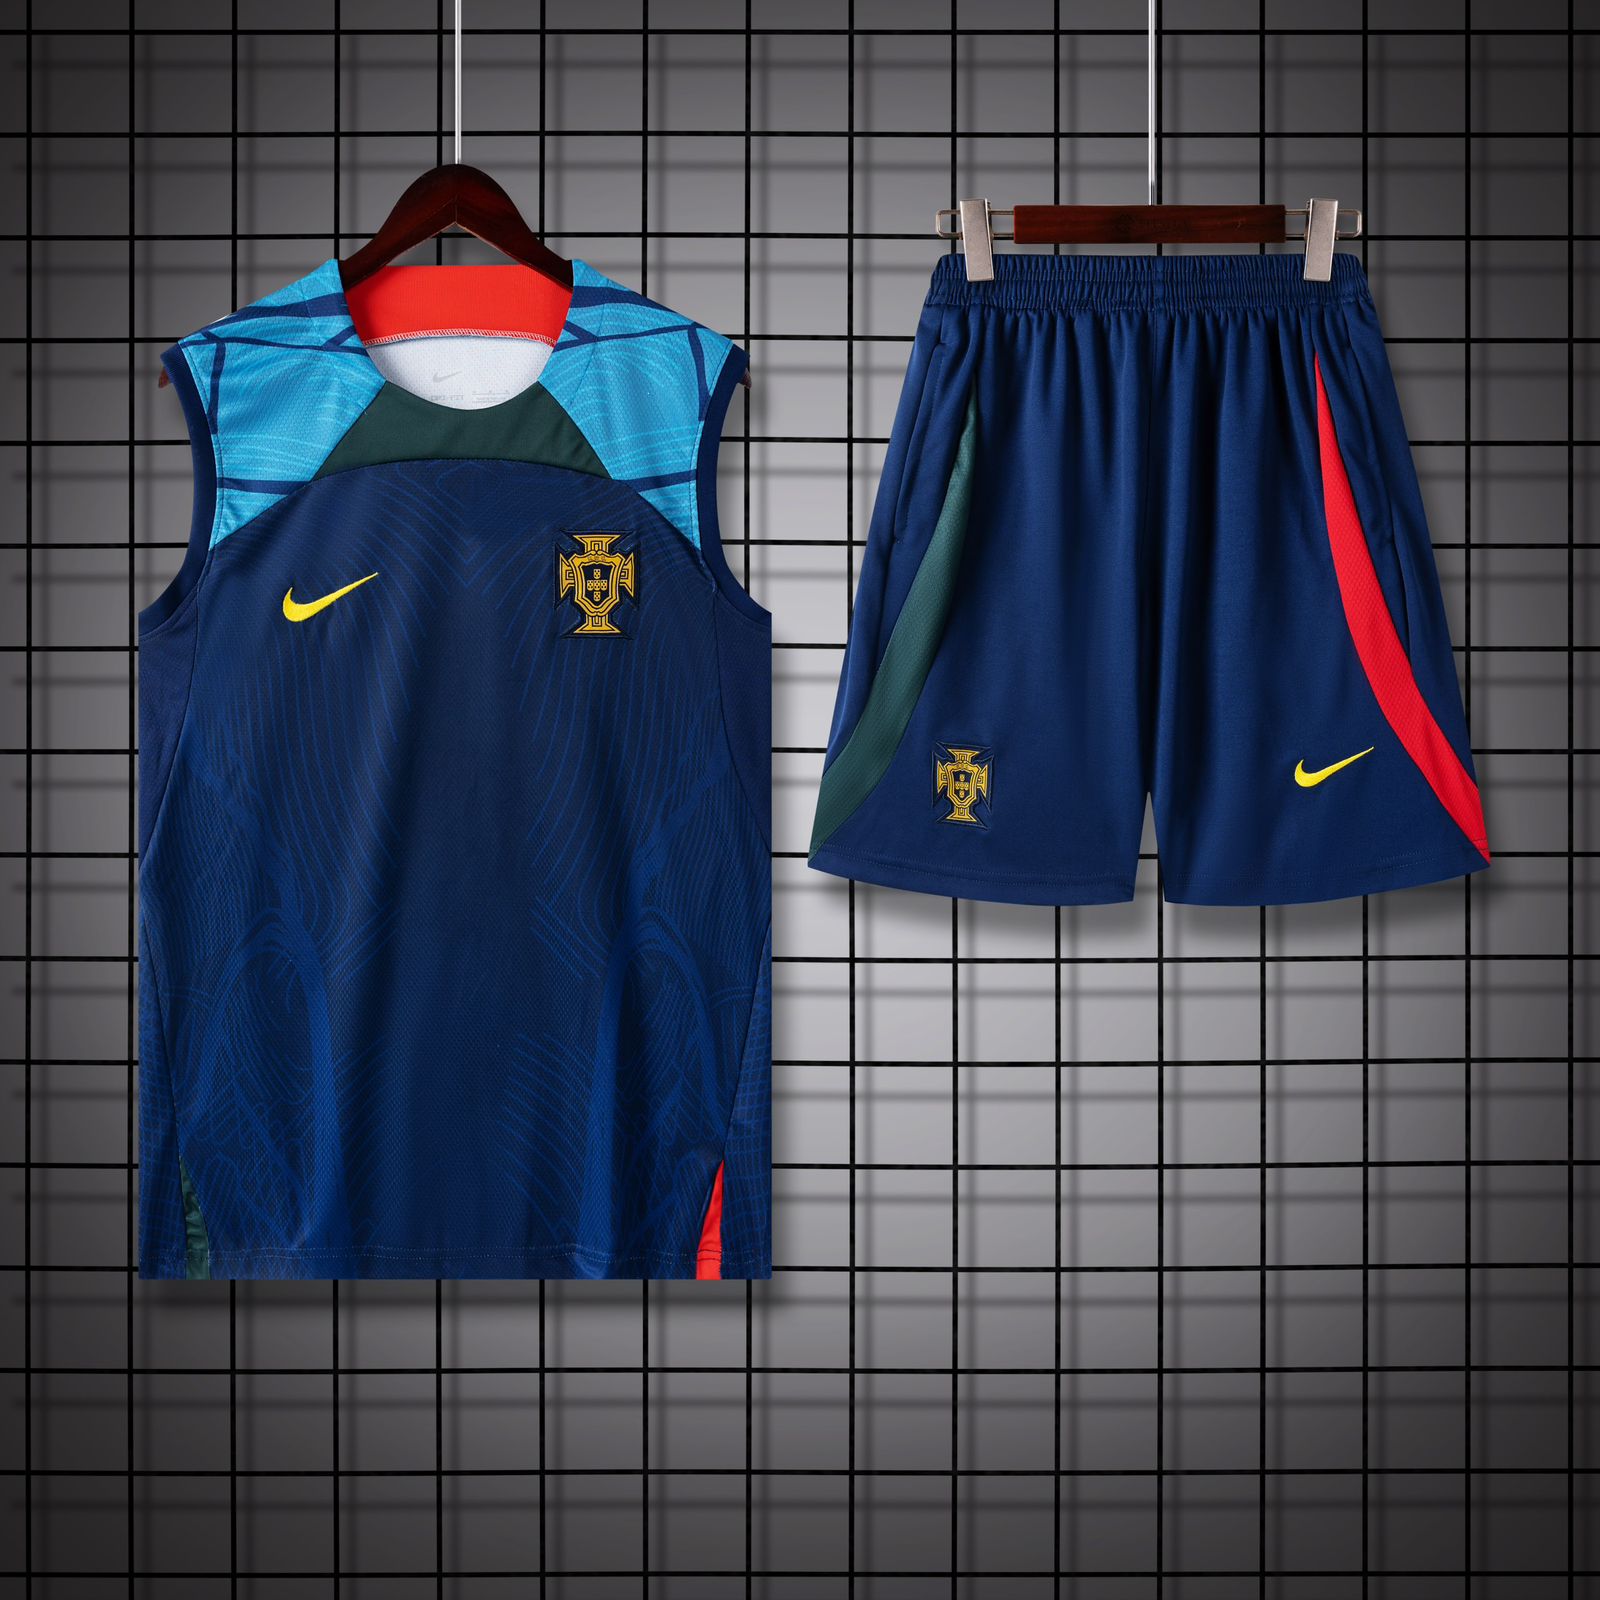 Portugal Navy Blue Sleeveless Jersey With Shorts